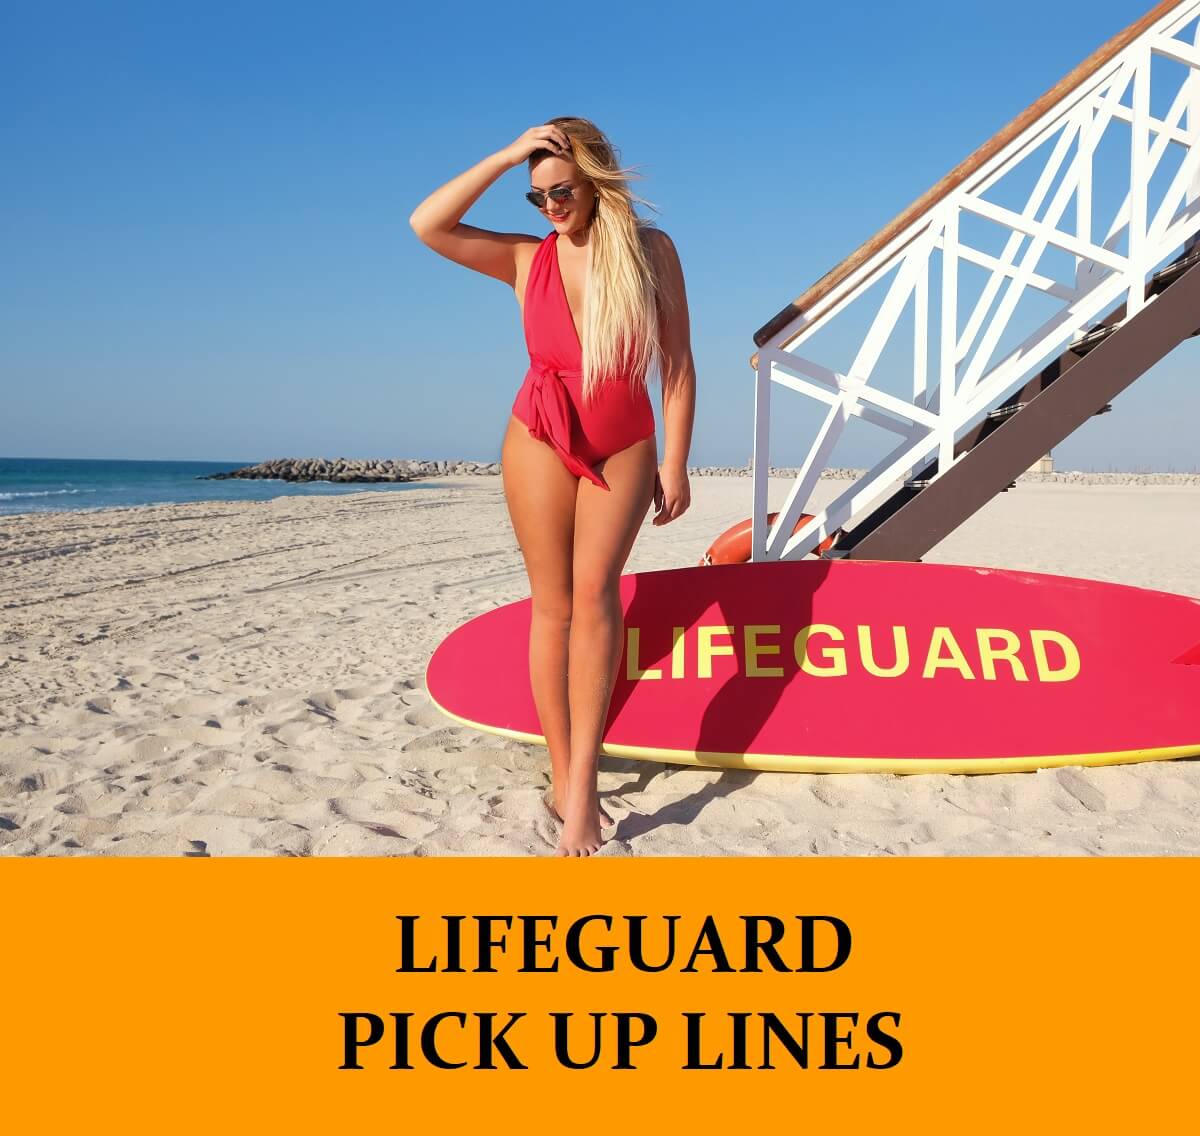 Pick Up Lines About Lifeguards